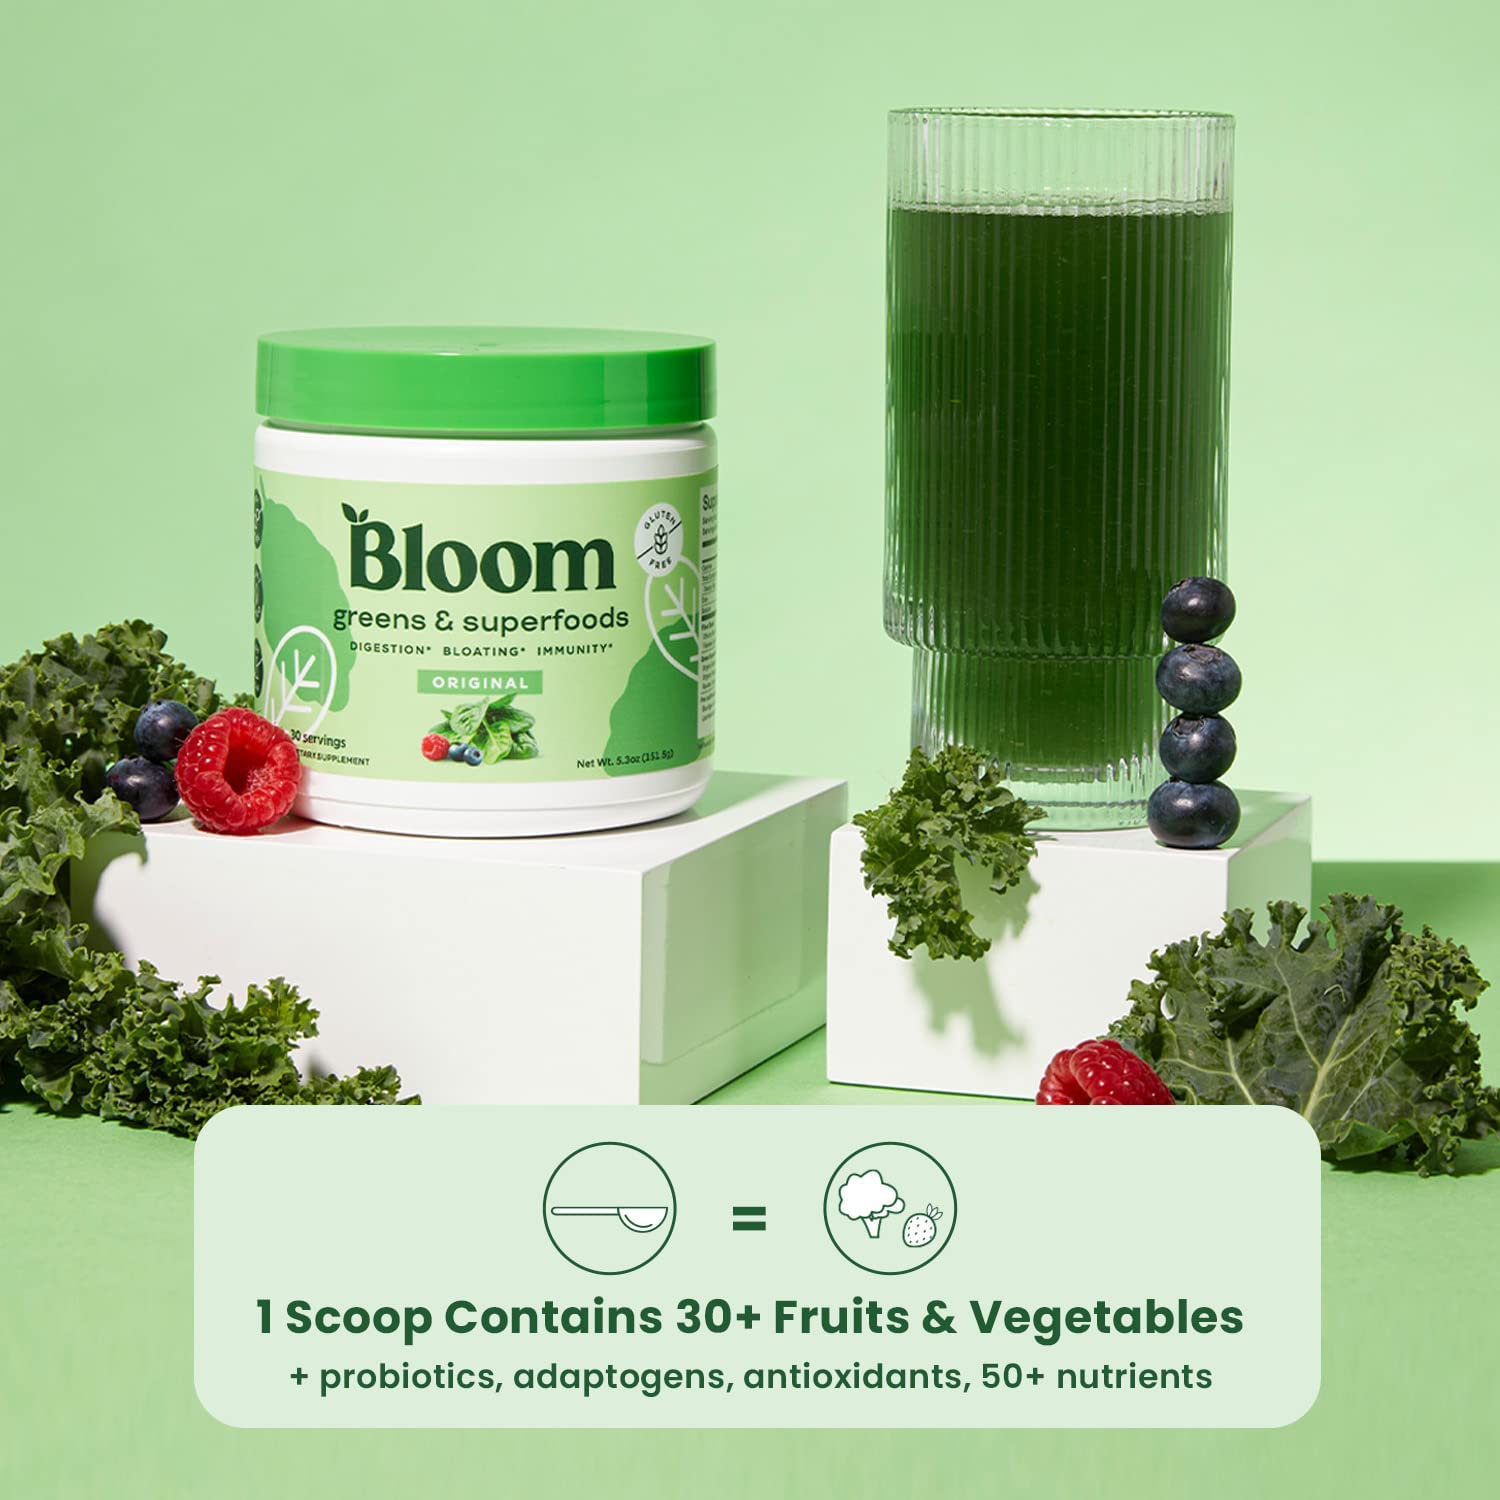 Are Bloom Greens Really Worth it?